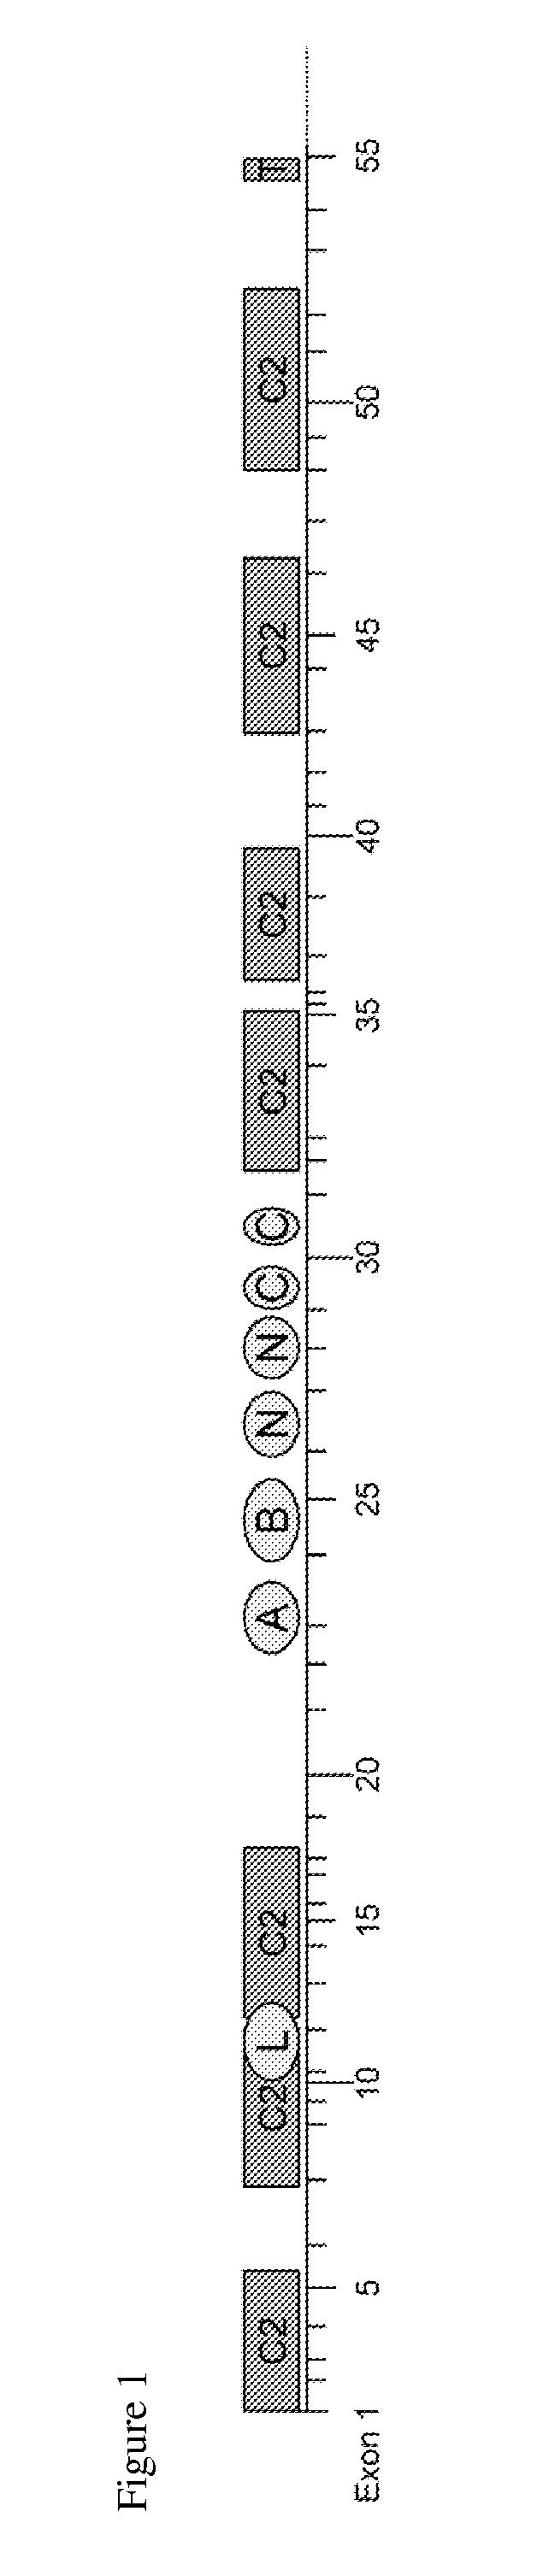 Methods and compositions for dysferlin exon-skipping